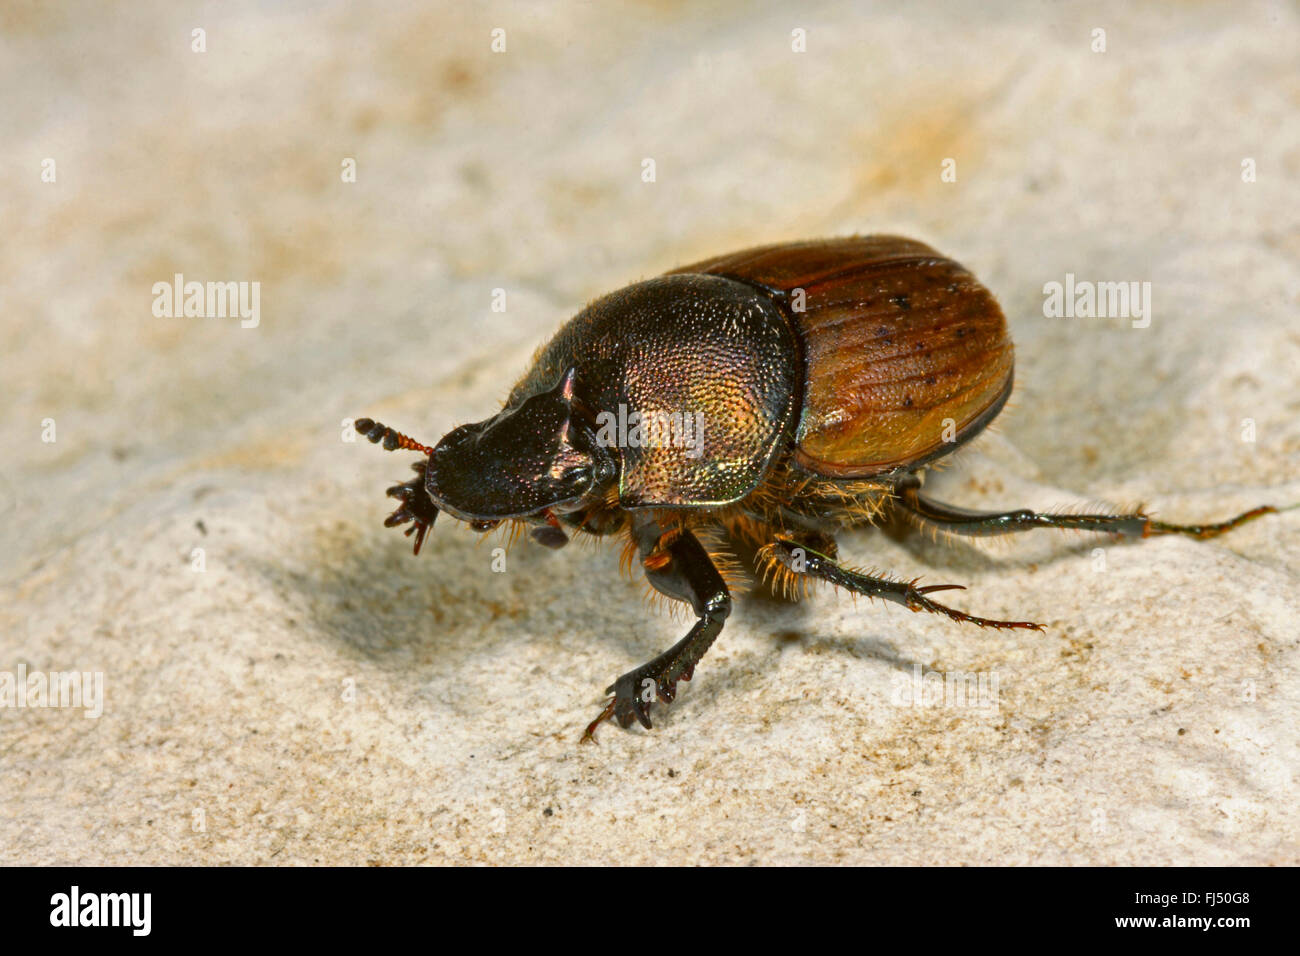 Dung beetle (Onthophagus coenobita), sits on a stone, Germany Stock Photo